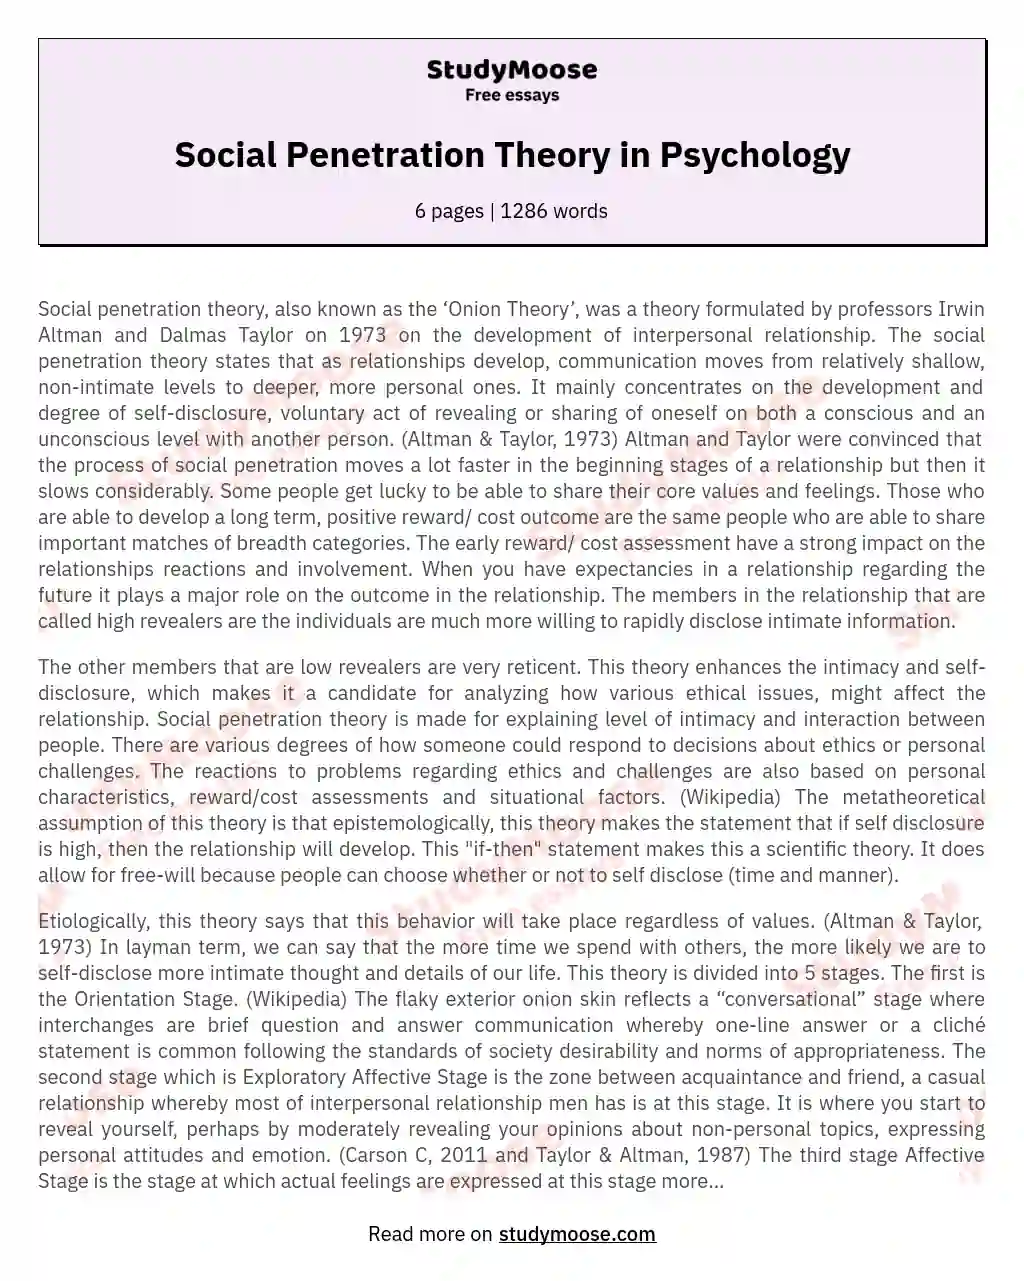 Social Penetration Theory in Psychology essay